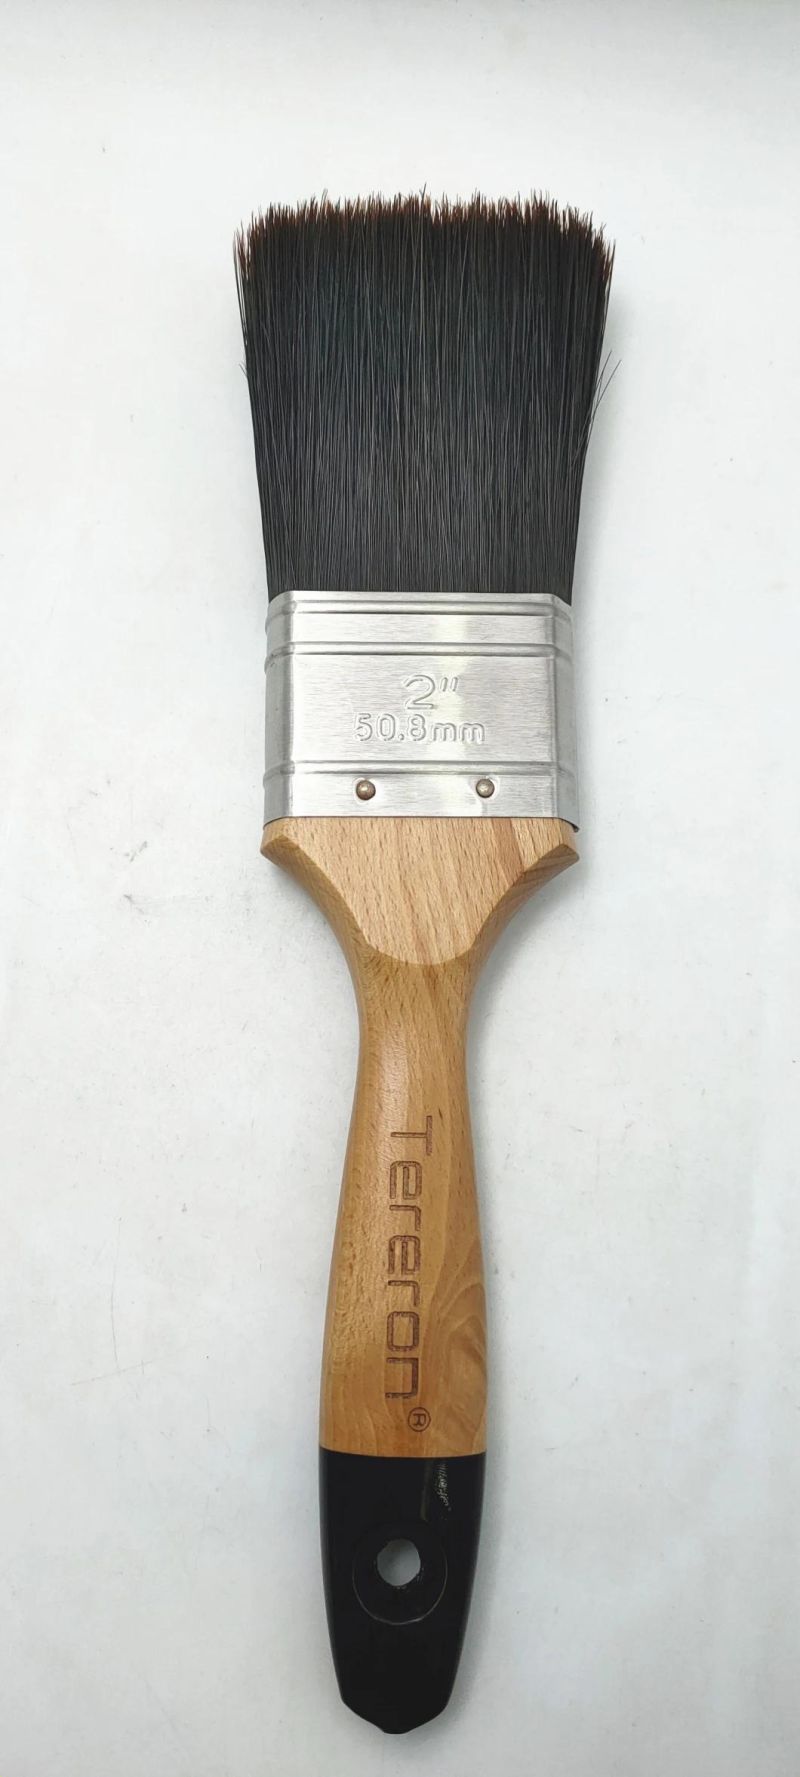 Factory Produces High Quality Paint Brush with Round Wooden Handle